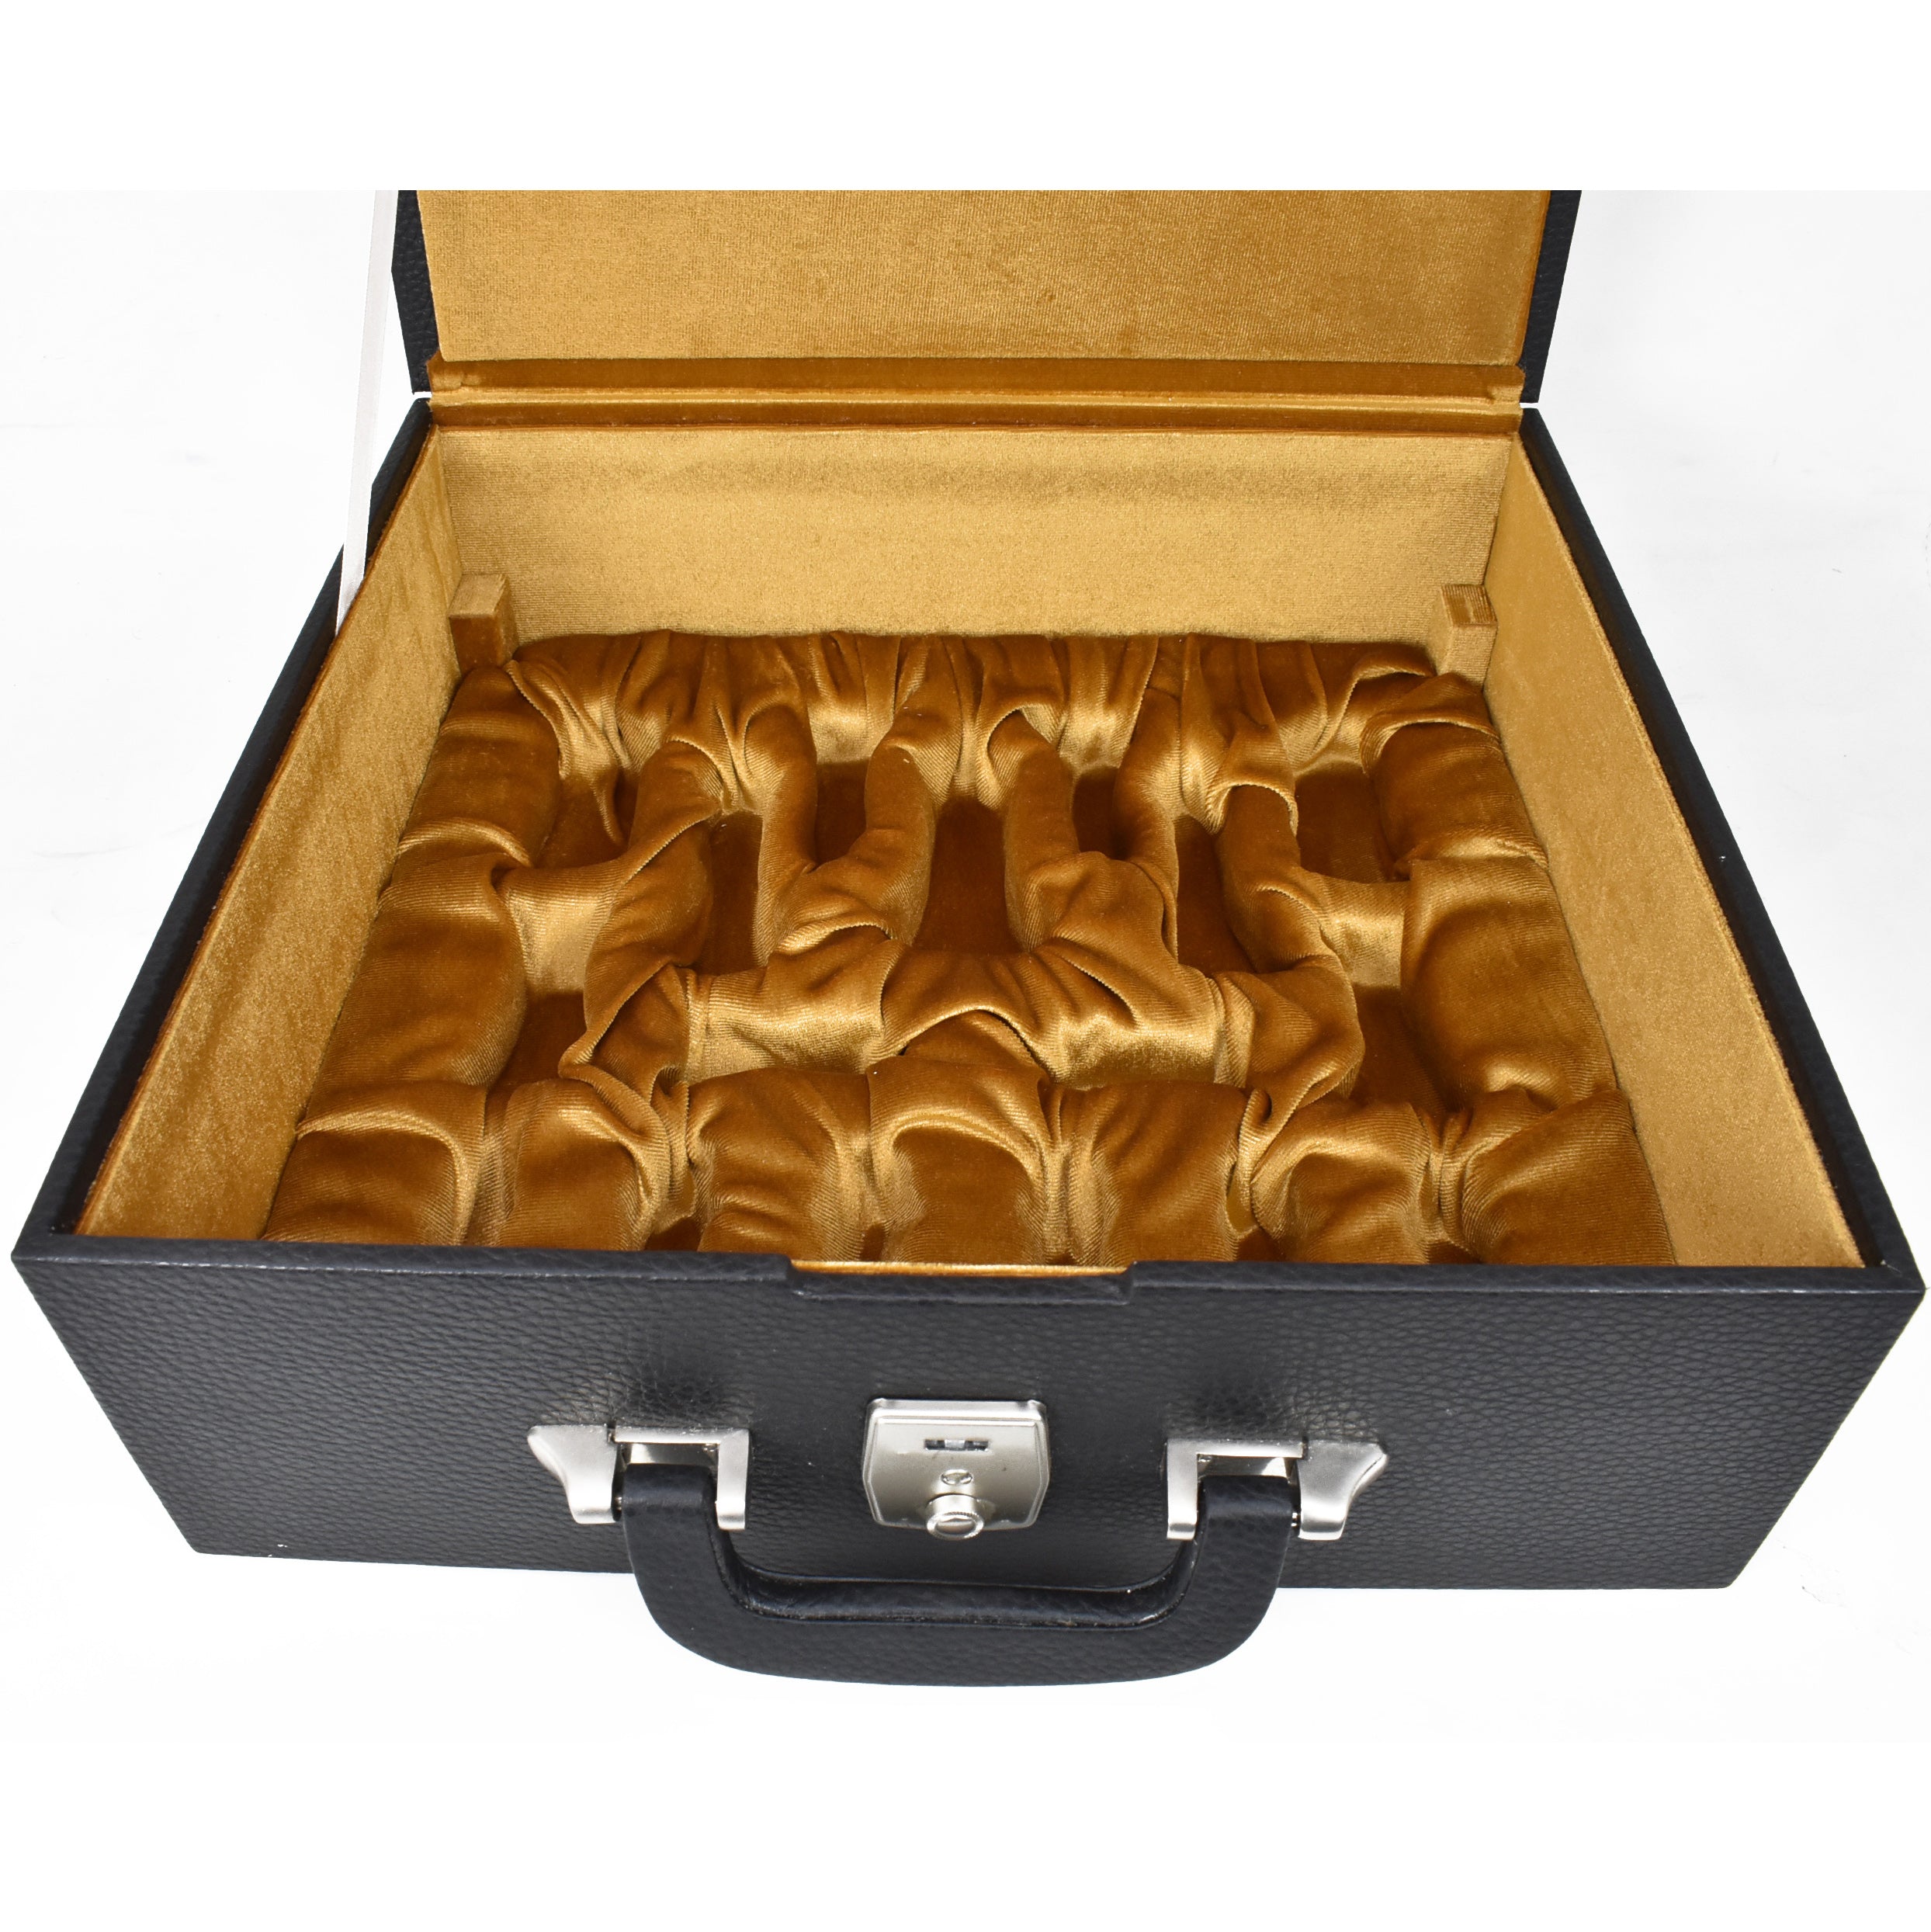 Combo of 3.9" Craftsman Series Staunton Chess Set - Pieces in Bud Rosewood with Borderless Chess board and Storage Box